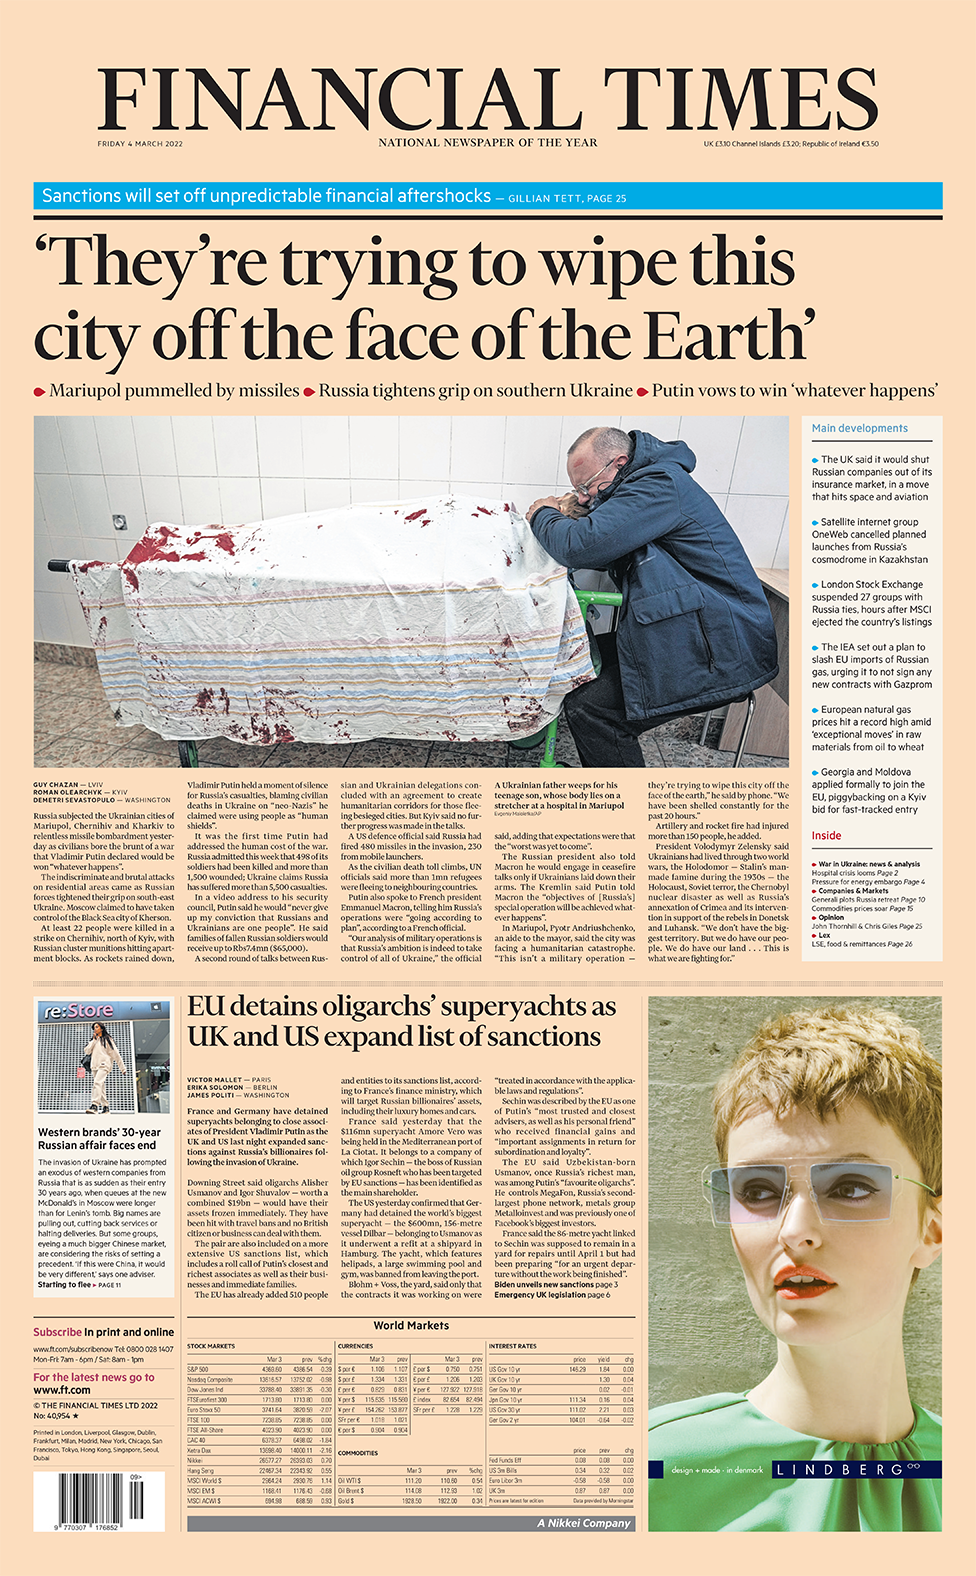 Financial Times front page 04/03/22